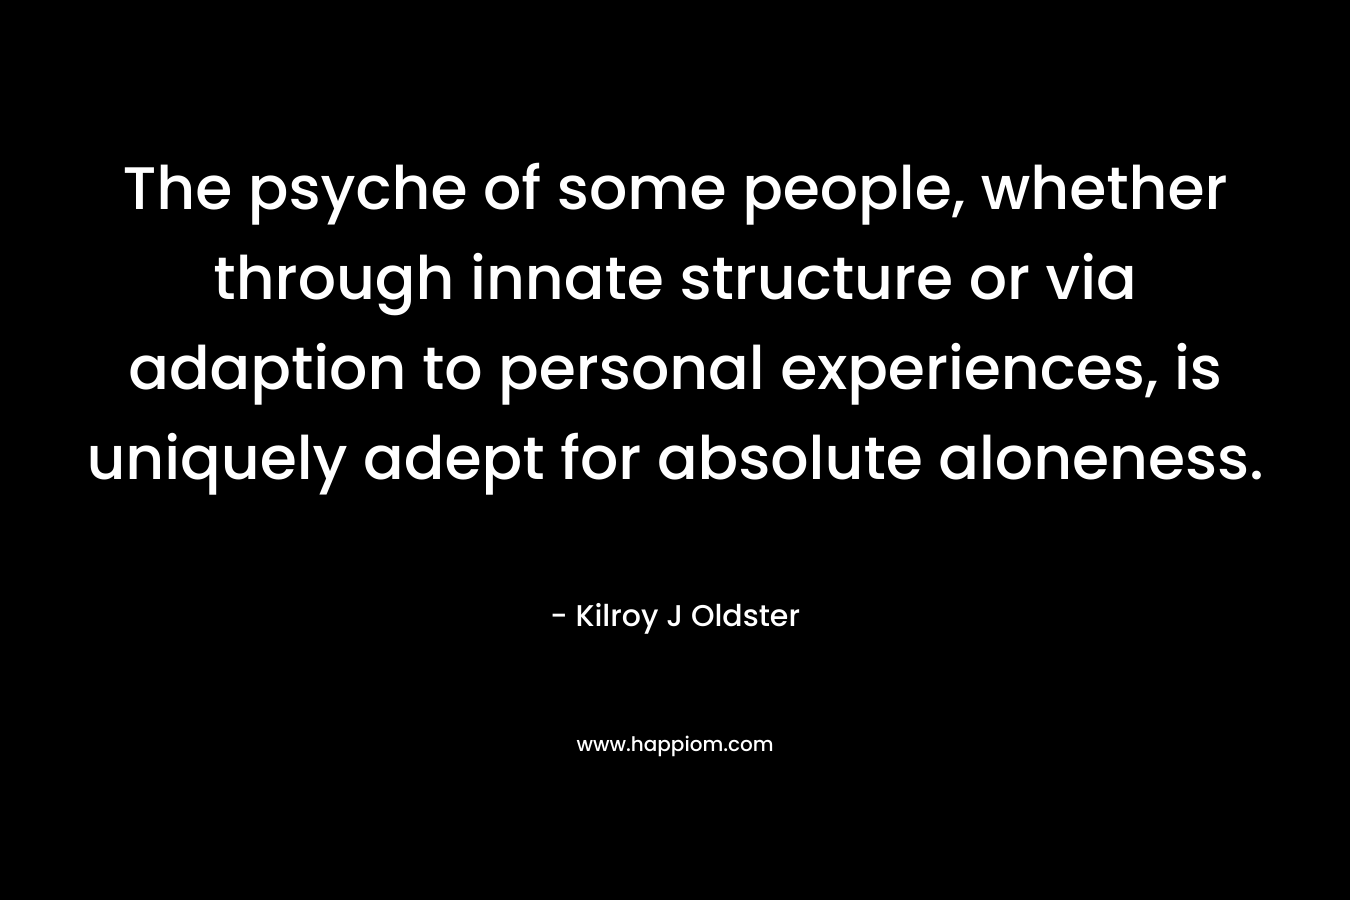 The psyche of some people, whether through innate structure or via adaption to personal experiences, is uniquely adept for absolute aloneness. – Kilroy J Oldster